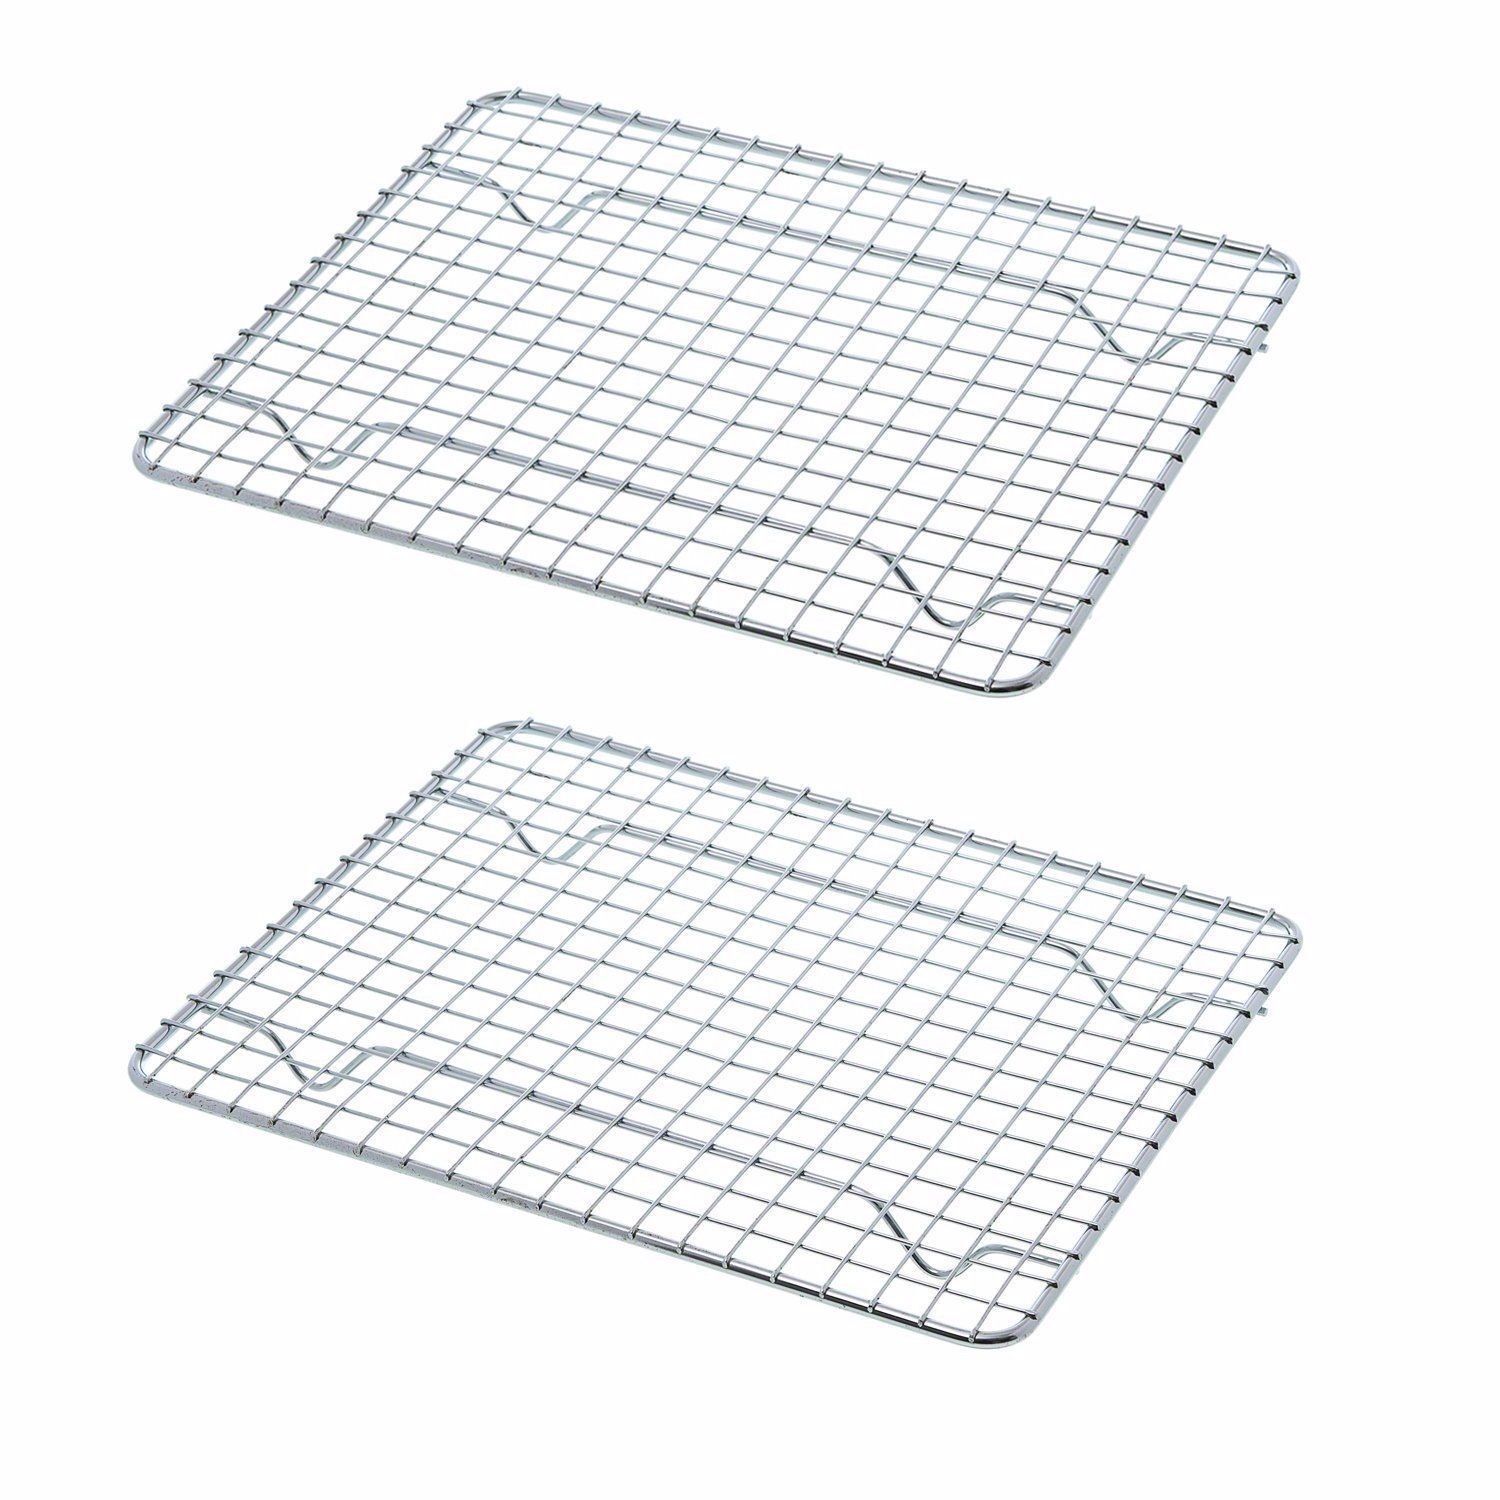 2 Cooling Racks 8" x 10" Half Size Footed Pan Grate Free Shipping USA Only | eBay US